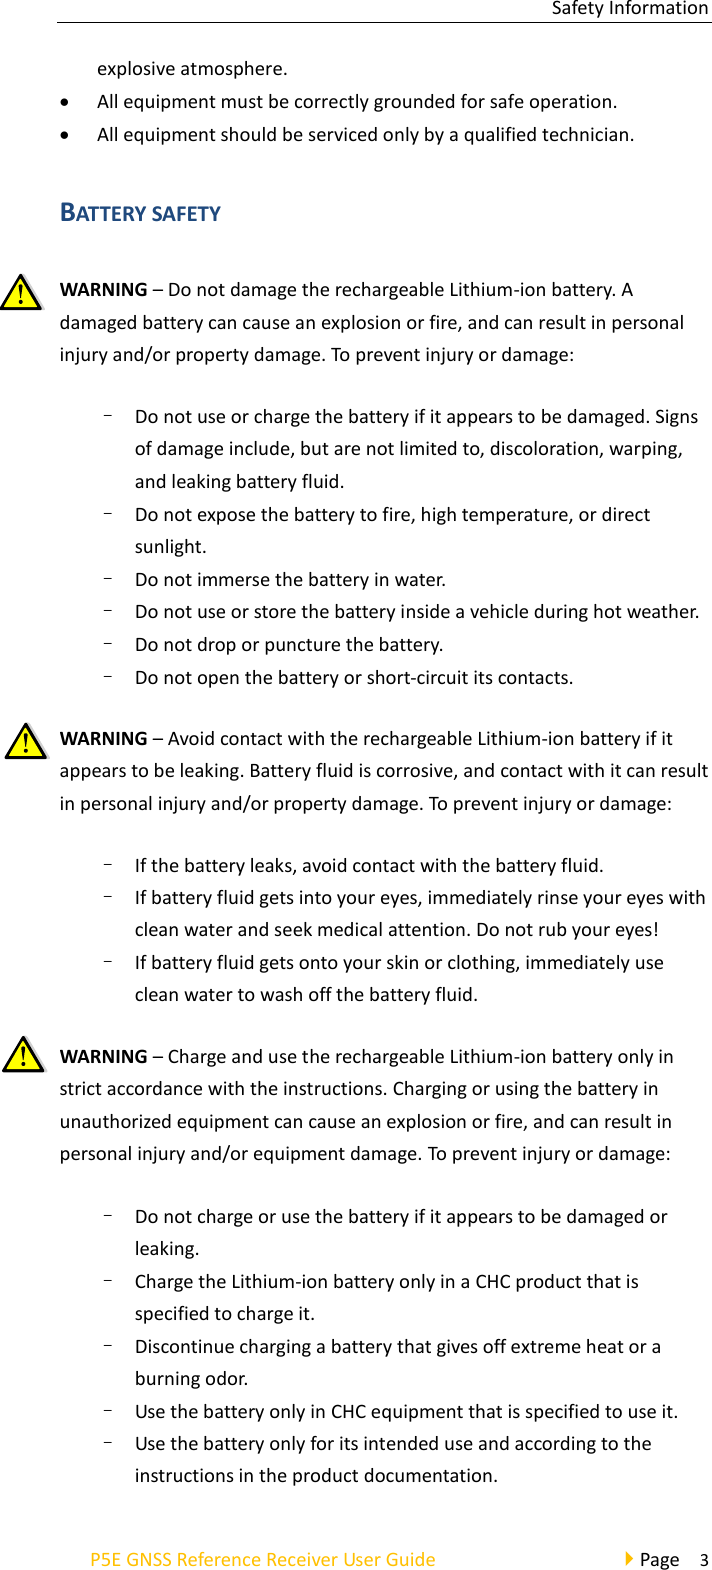 Safety Information P5E GNSS Reference Receiver User Guide                                     Page    3 explosive atmosphere. • All equipment must be correctly grounded for safe operation. • All equipment should be serviced only by a qualified technician. BATTERY SAFETY WARNING – Do not damage the rechargeable Lithium-ion battery. A damaged battery can cause an explosion or fire, and can result in personal injury and/or property damage. To prevent injury or damage: – Do not use or charge the battery if it appears to be damaged. Signs of damage include, but are not limited to, discoloration, warping, and leaking battery fluid. – Do not expose the battery to fire, high temperature, or direct sunlight. – Do not immerse the battery in water. – Do not use or store the battery inside a vehicle during hot weather. – Do not drop or puncture the battery. – Do not open the battery or short-circuit its contacts. WARNING – Avoid contact with the rechargeable Lithium-ion battery if it appears to be leaking. Battery fluid is corrosive, and contact with it can result in personal injury and/or property damage. To prevent injury or damage: – If the battery leaks, avoid contact with the battery fluid. – If battery fluid gets into your eyes, immediately rinse your eyes with clean water and seek medical attention. Do not rub your eyes! – If battery fluid gets onto your skin or clothing, immediately use clean water to wash off the battery fluid. WARNING – Charge and use the rechargeable Lithium-ion battery only in strict accordance with the instructions. Charging or using the battery in unauthorized equipment can cause an explosion or fire, and can result in personal injury and/or equipment damage. To prevent injury or damage: – Do not charge or use the battery if it appears to be damaged or leaking. – Charge the Lithium-ion battery only in a CHC product that is specified to charge it. – Discontinue charging a battery that gives off extreme heat or a burning odor. – Use the battery only in CHC equipment that is specified to use it. – Use the battery only for its intended use and according to the instructions in the product documentation. 